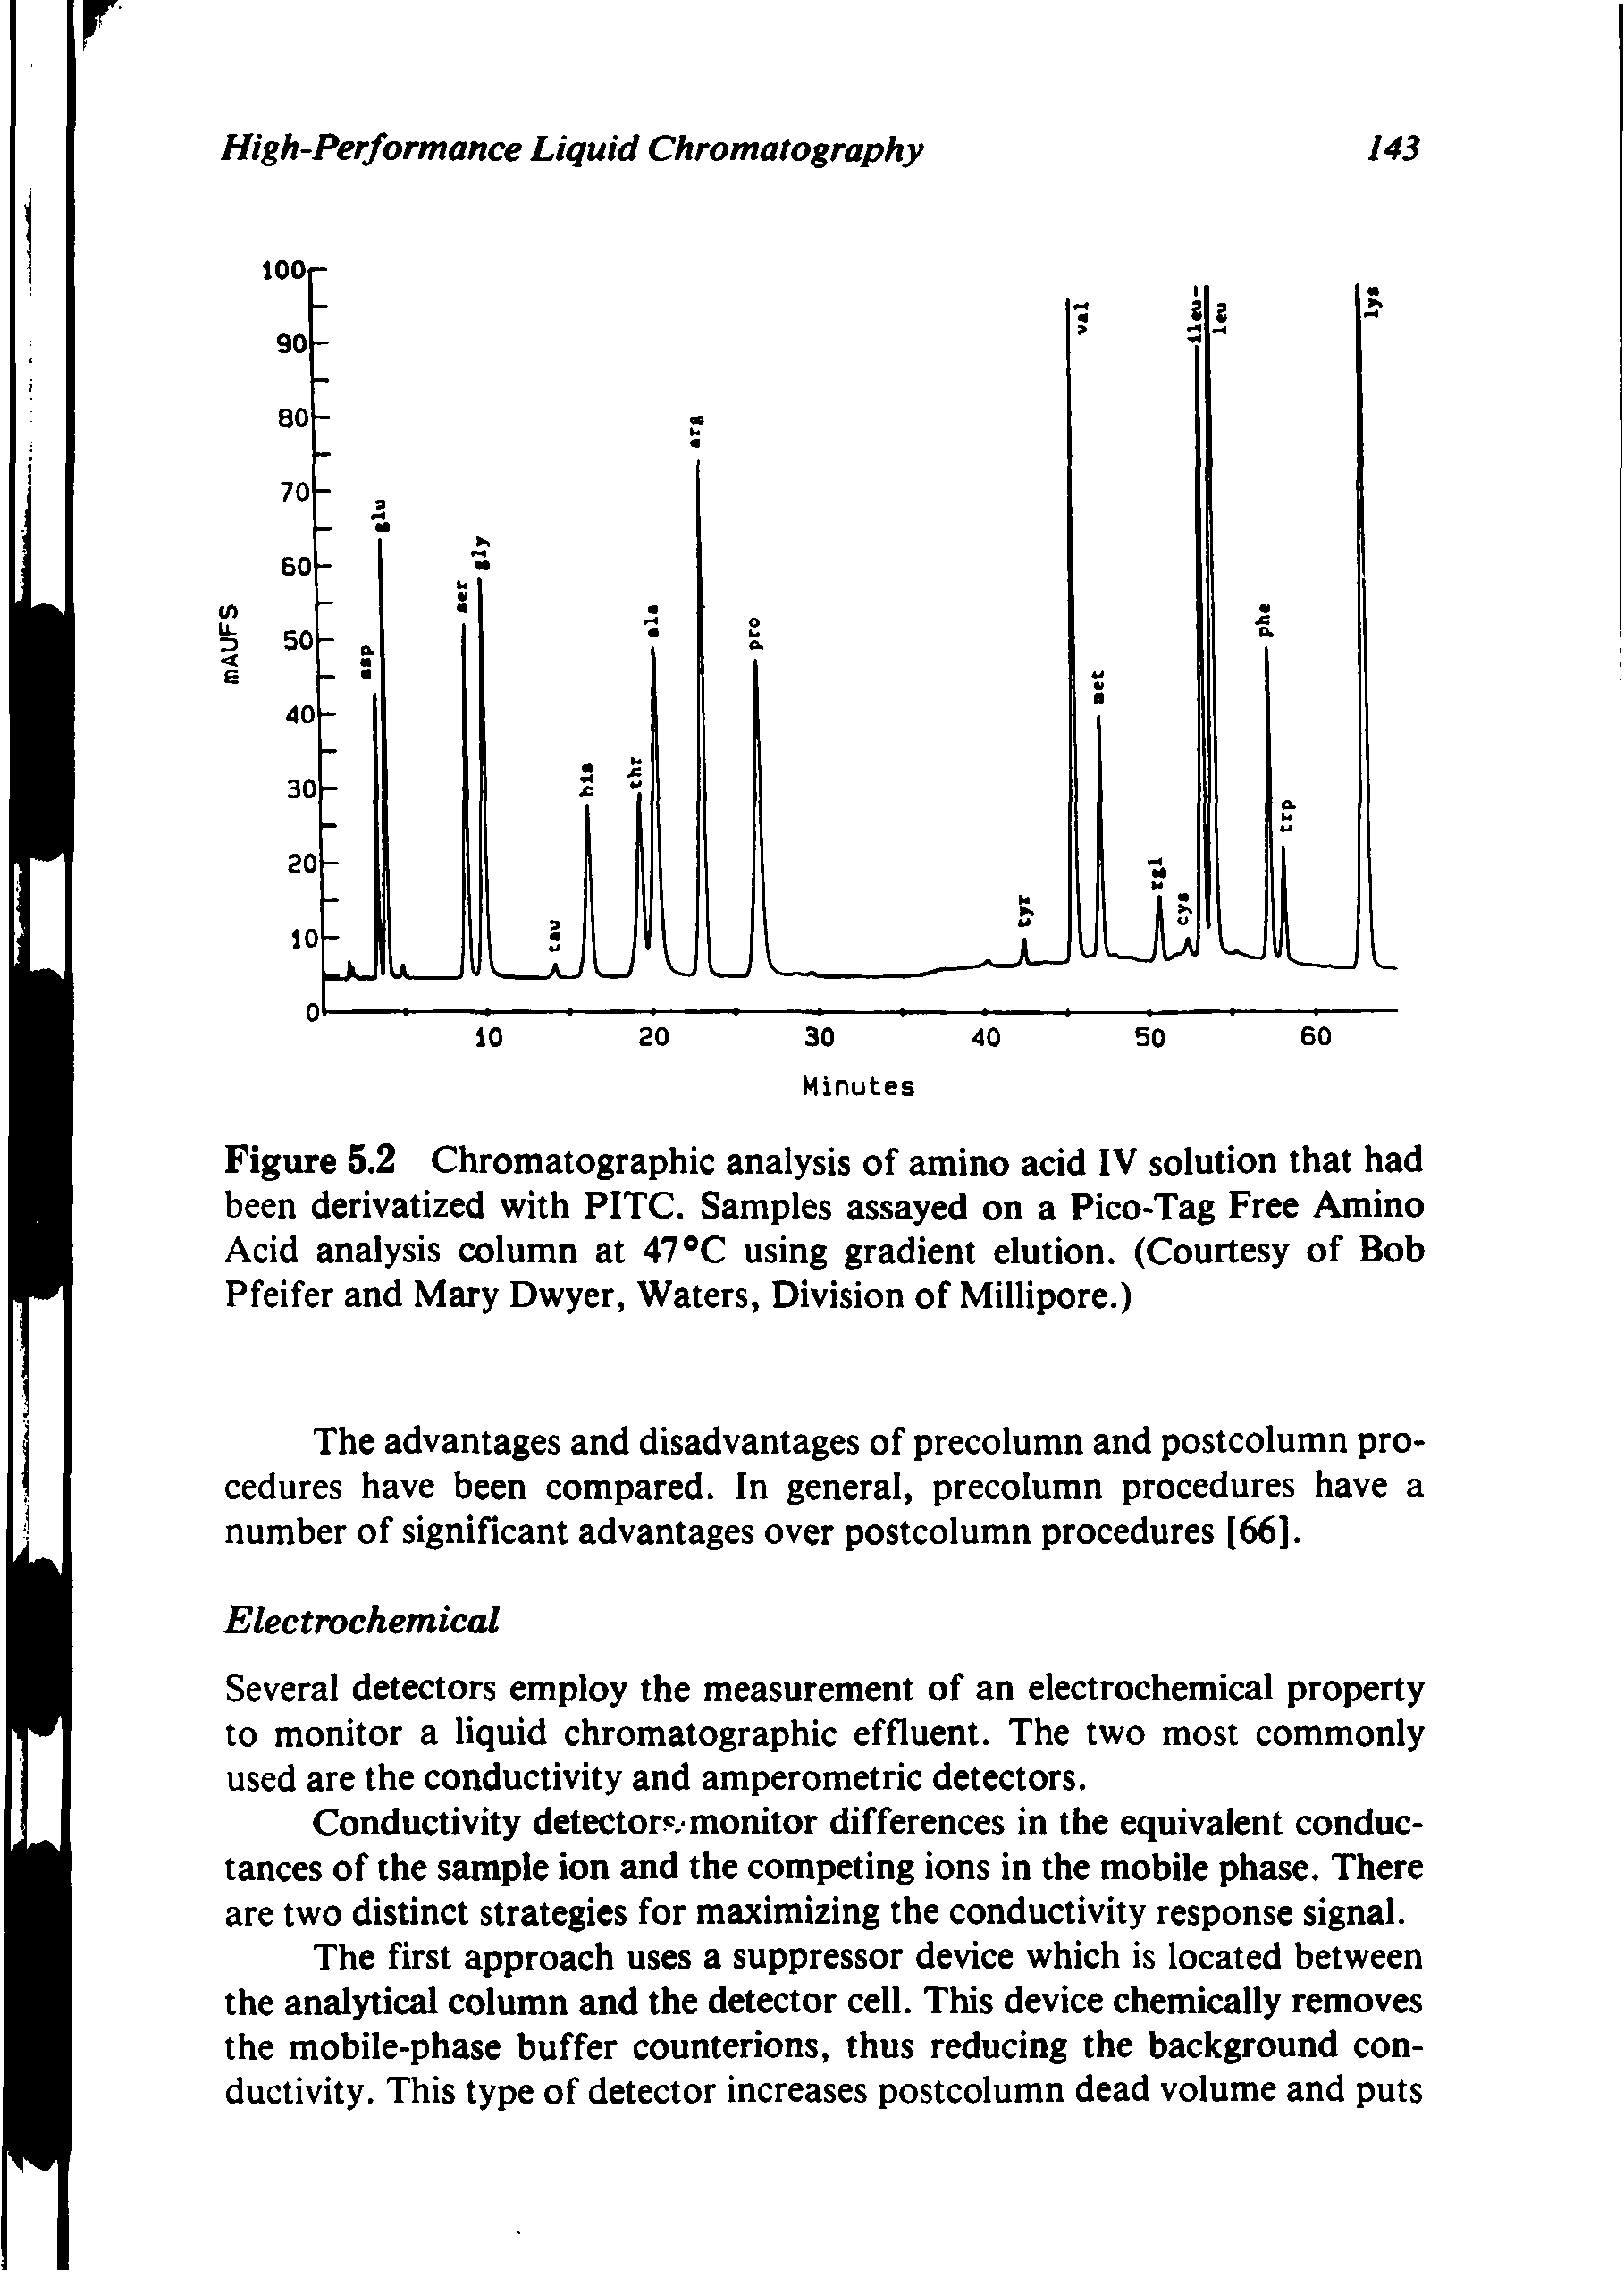 Figure 5.2 Chromatographic analysis of amino acid IV solution that had been derivatized with PITC. Samples assayed on a Pico-Tag Free Amino Acid analysis column at 47°C using gradient elution. (Courtesy of Bob Pfeifer and Mary Dwyer, Waters, Division of Millipore.)...